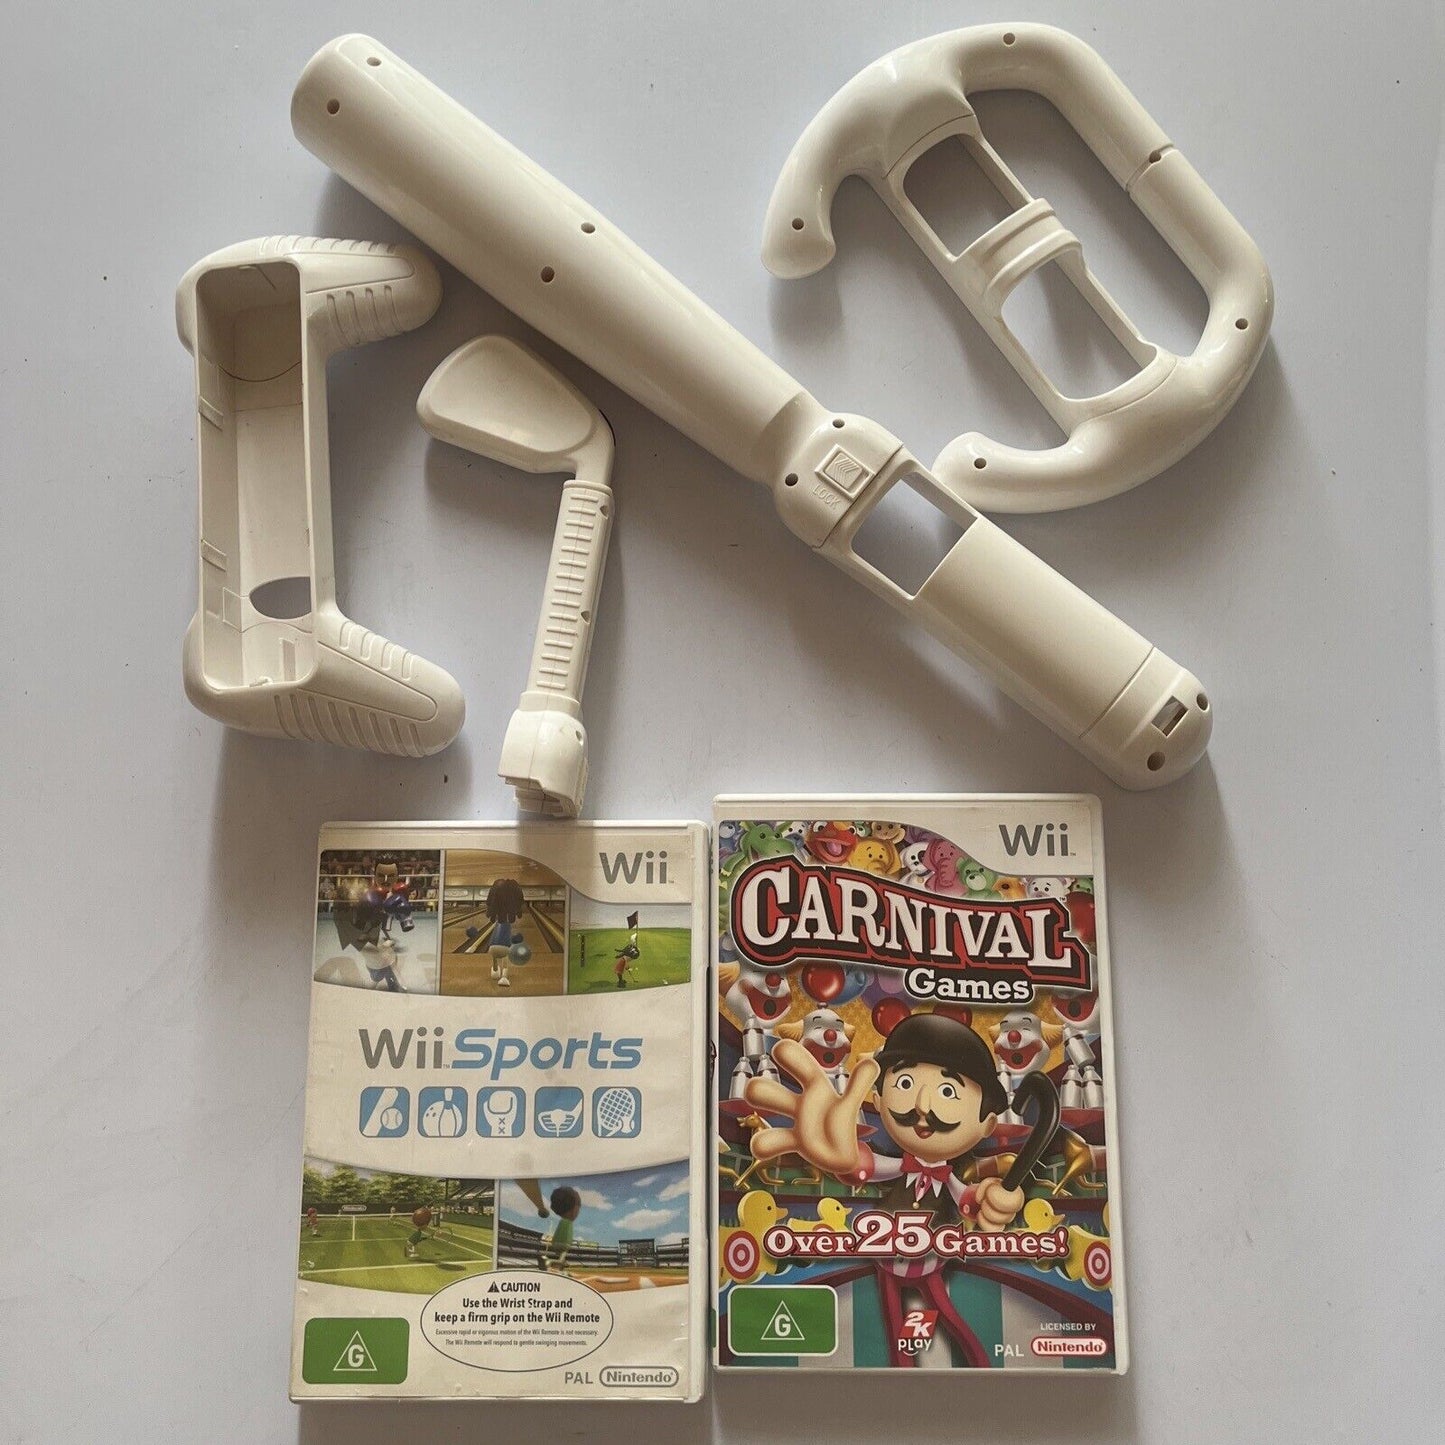 Wii Sports & Carnival Games Nintendo Wii With Accessories Bat, Golf Club PAL